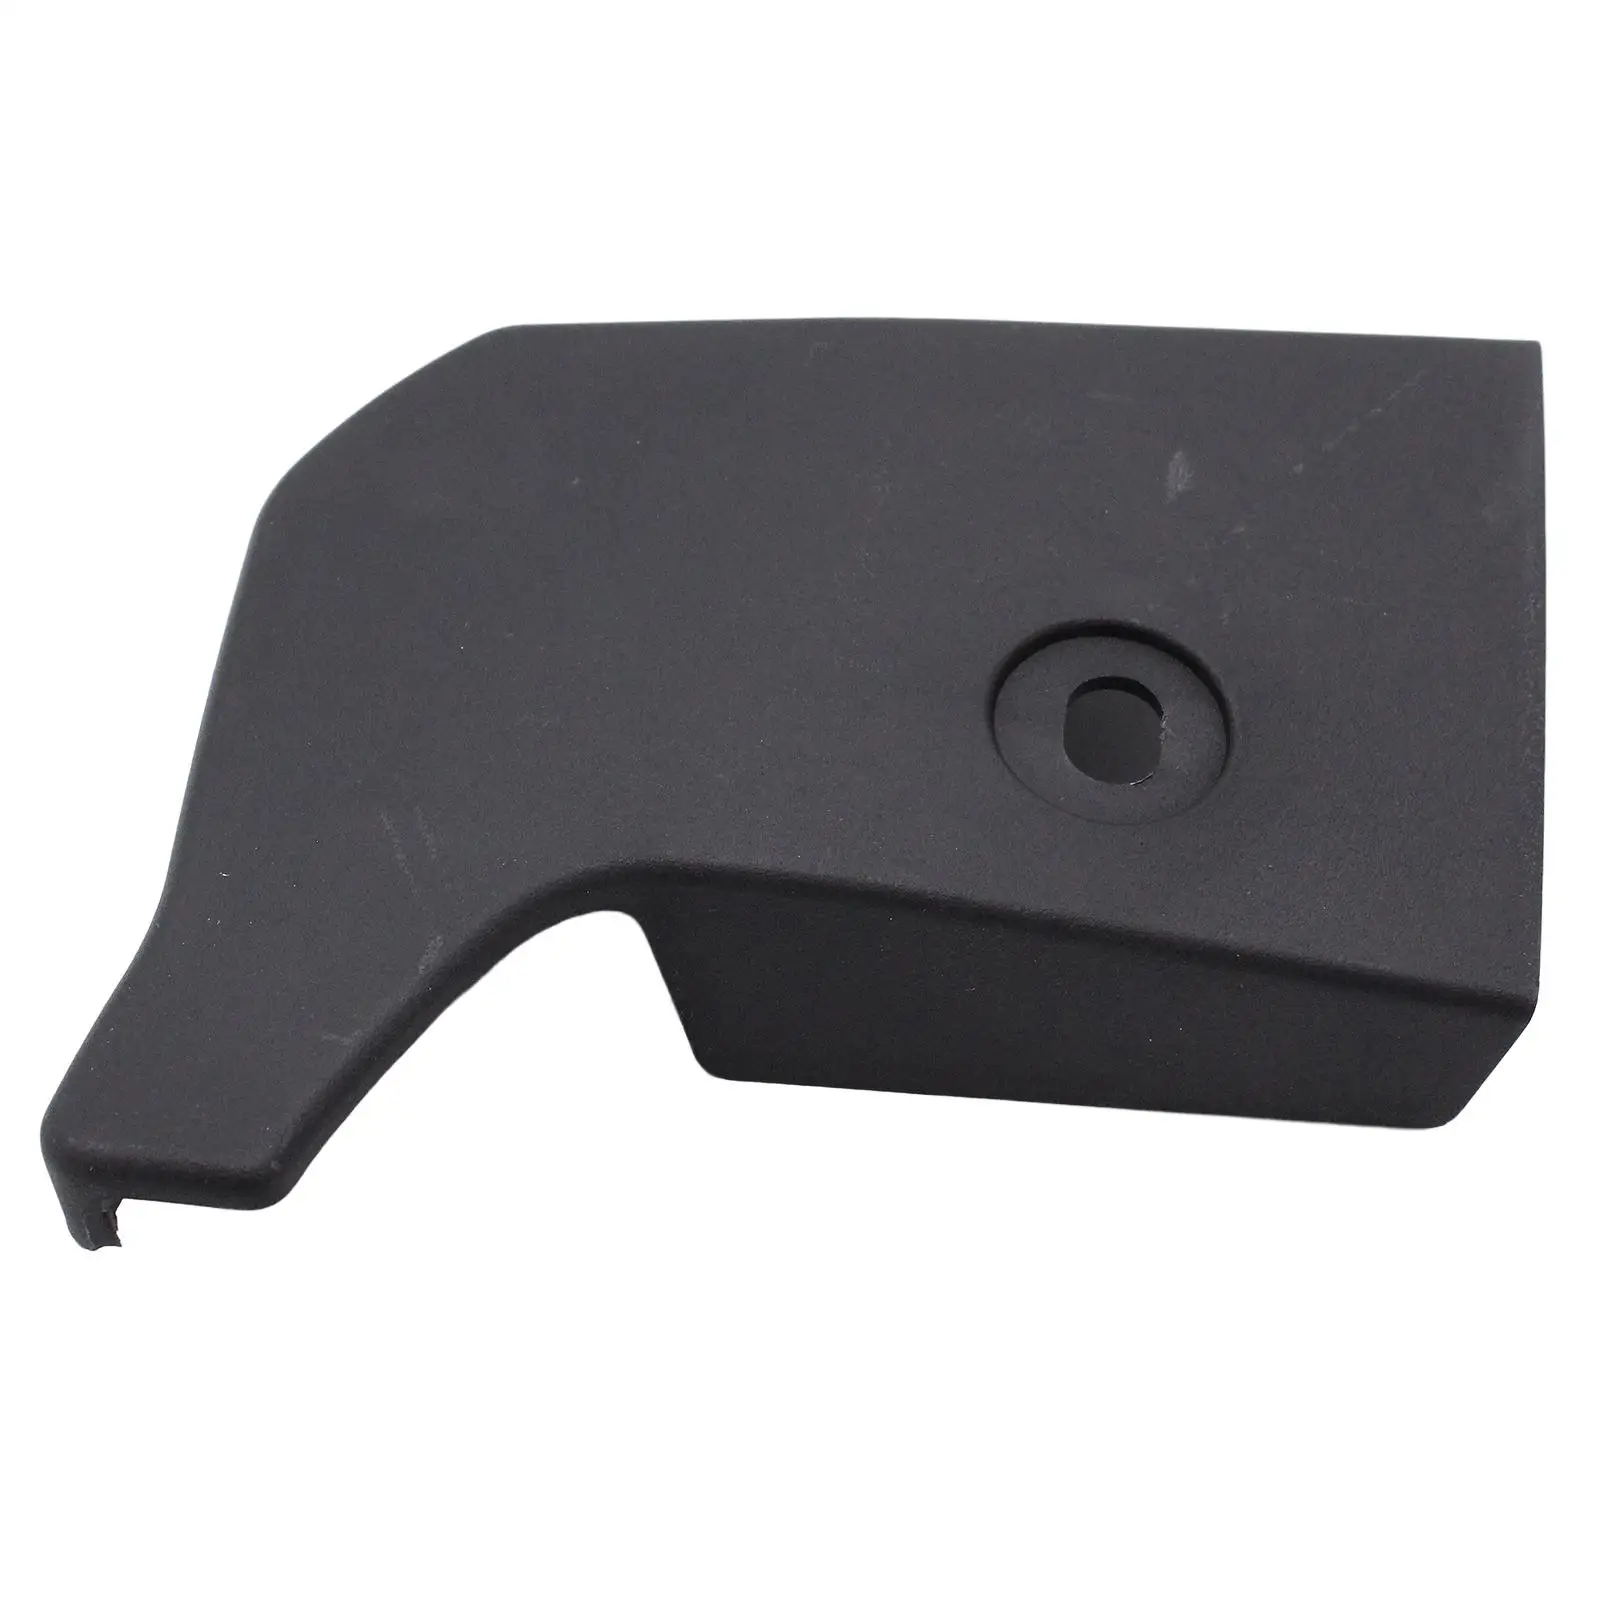 Car Front Side Skirt End Cover Caps C1Bj10175AC 1877700 Fit for Ford Fiesta MK8 3 Door Accessory